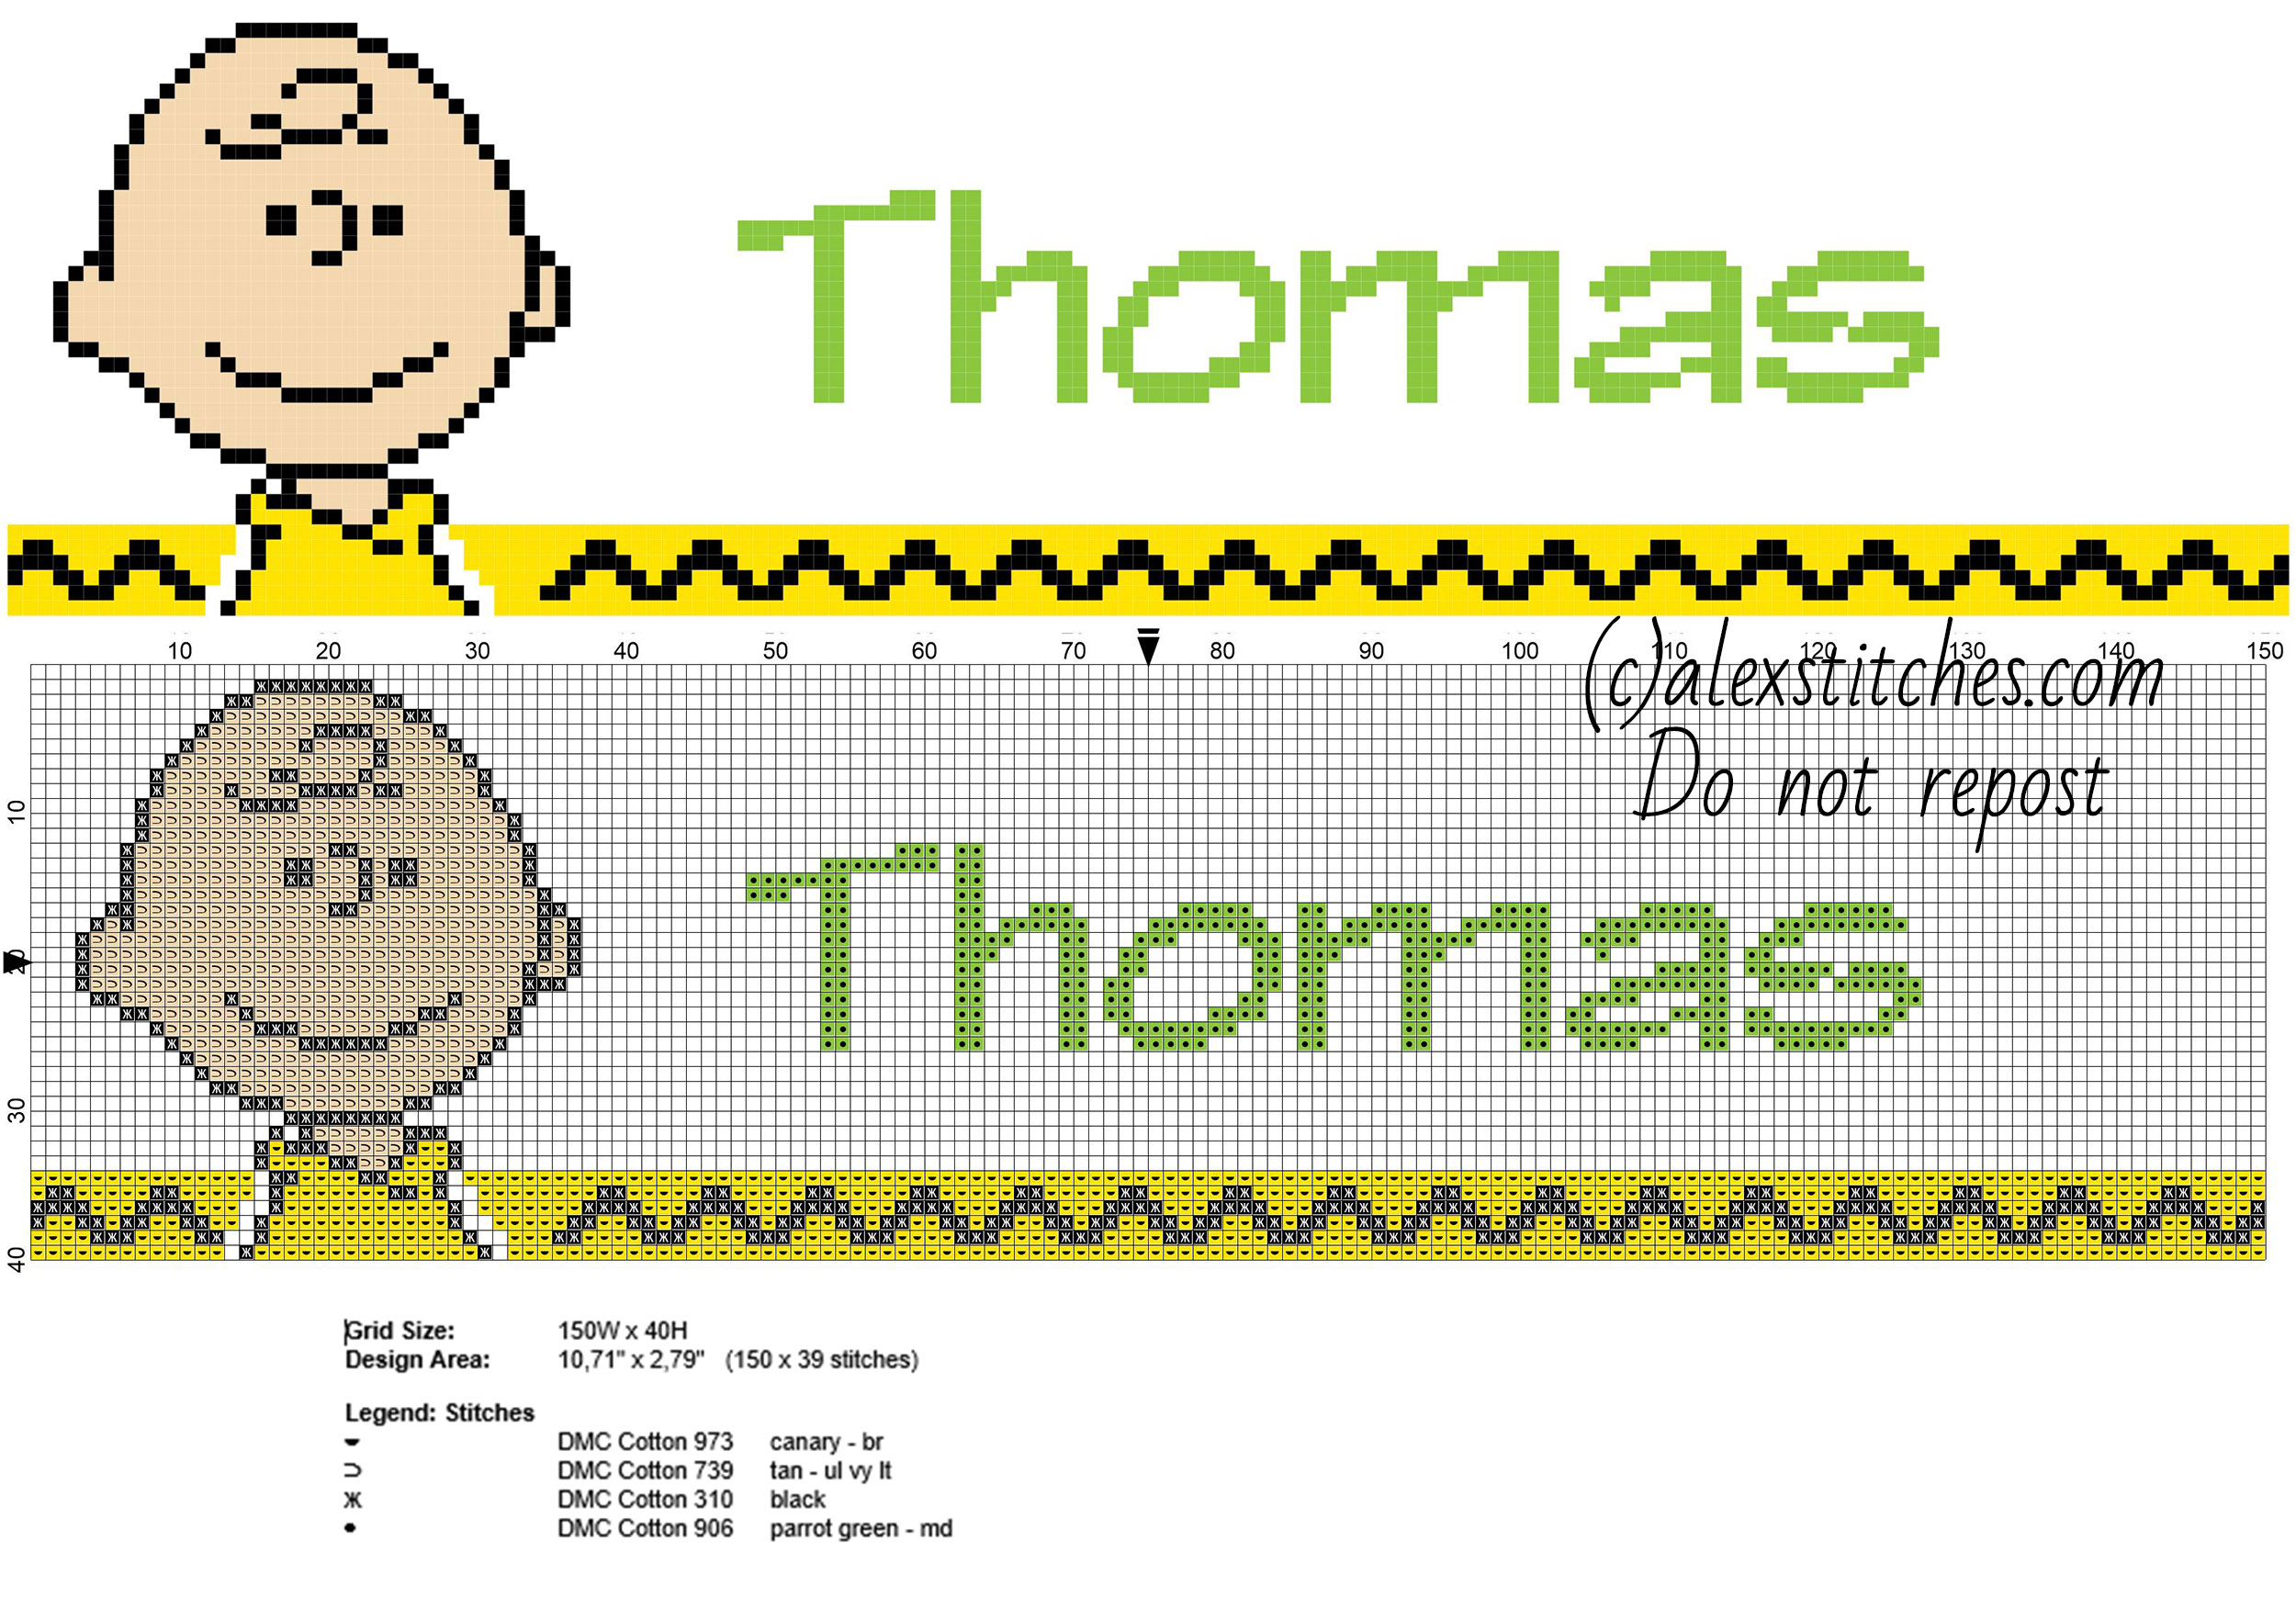 Thomas cross stitch baby male name with Charlie Brown Peanuts character